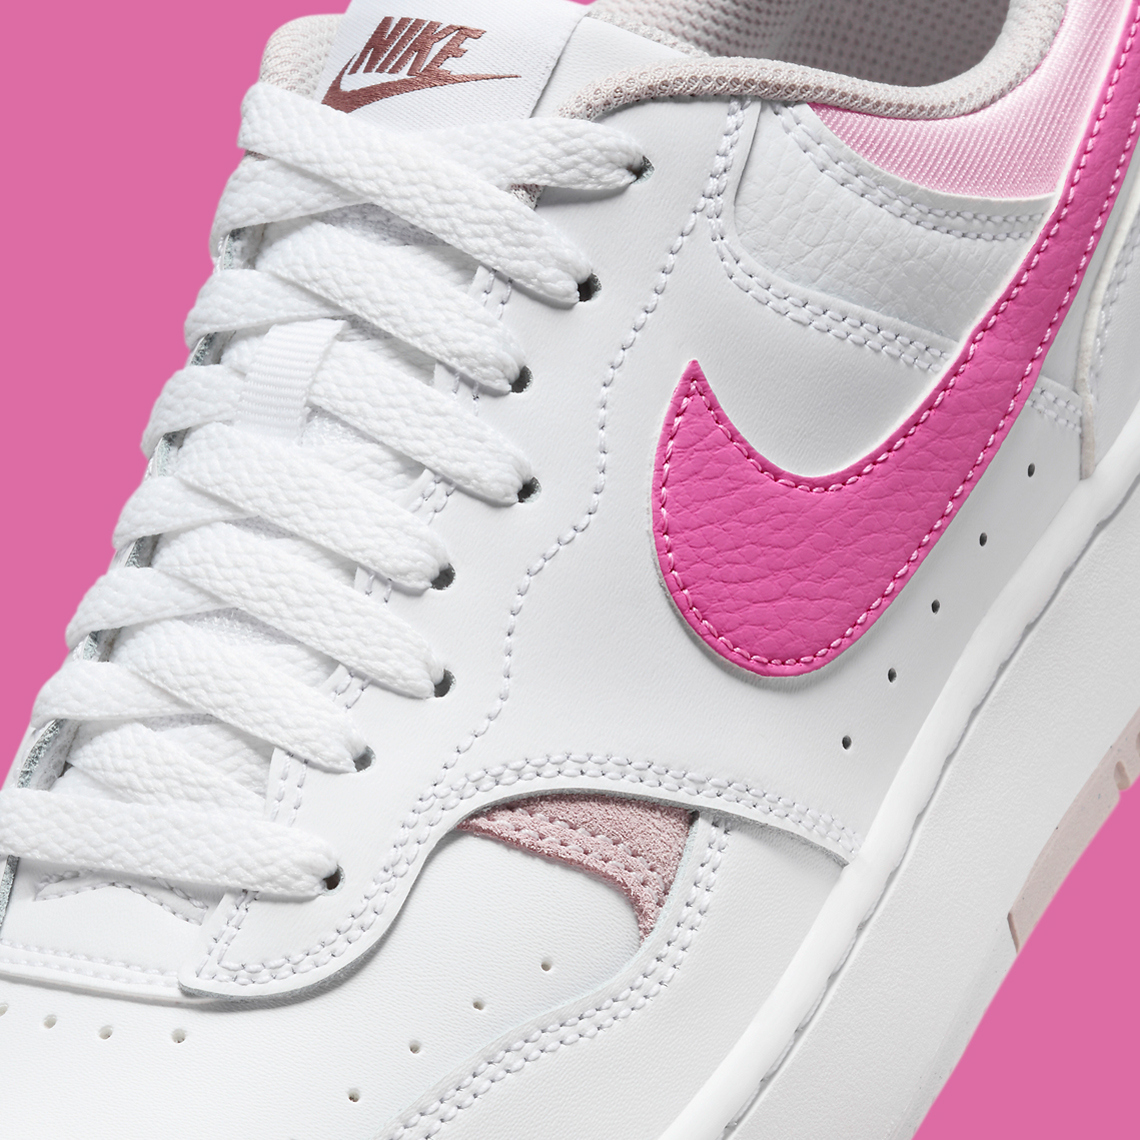 buy the Dunk Low 3D Swoosh Wmns White Pink Fz3613 100 5